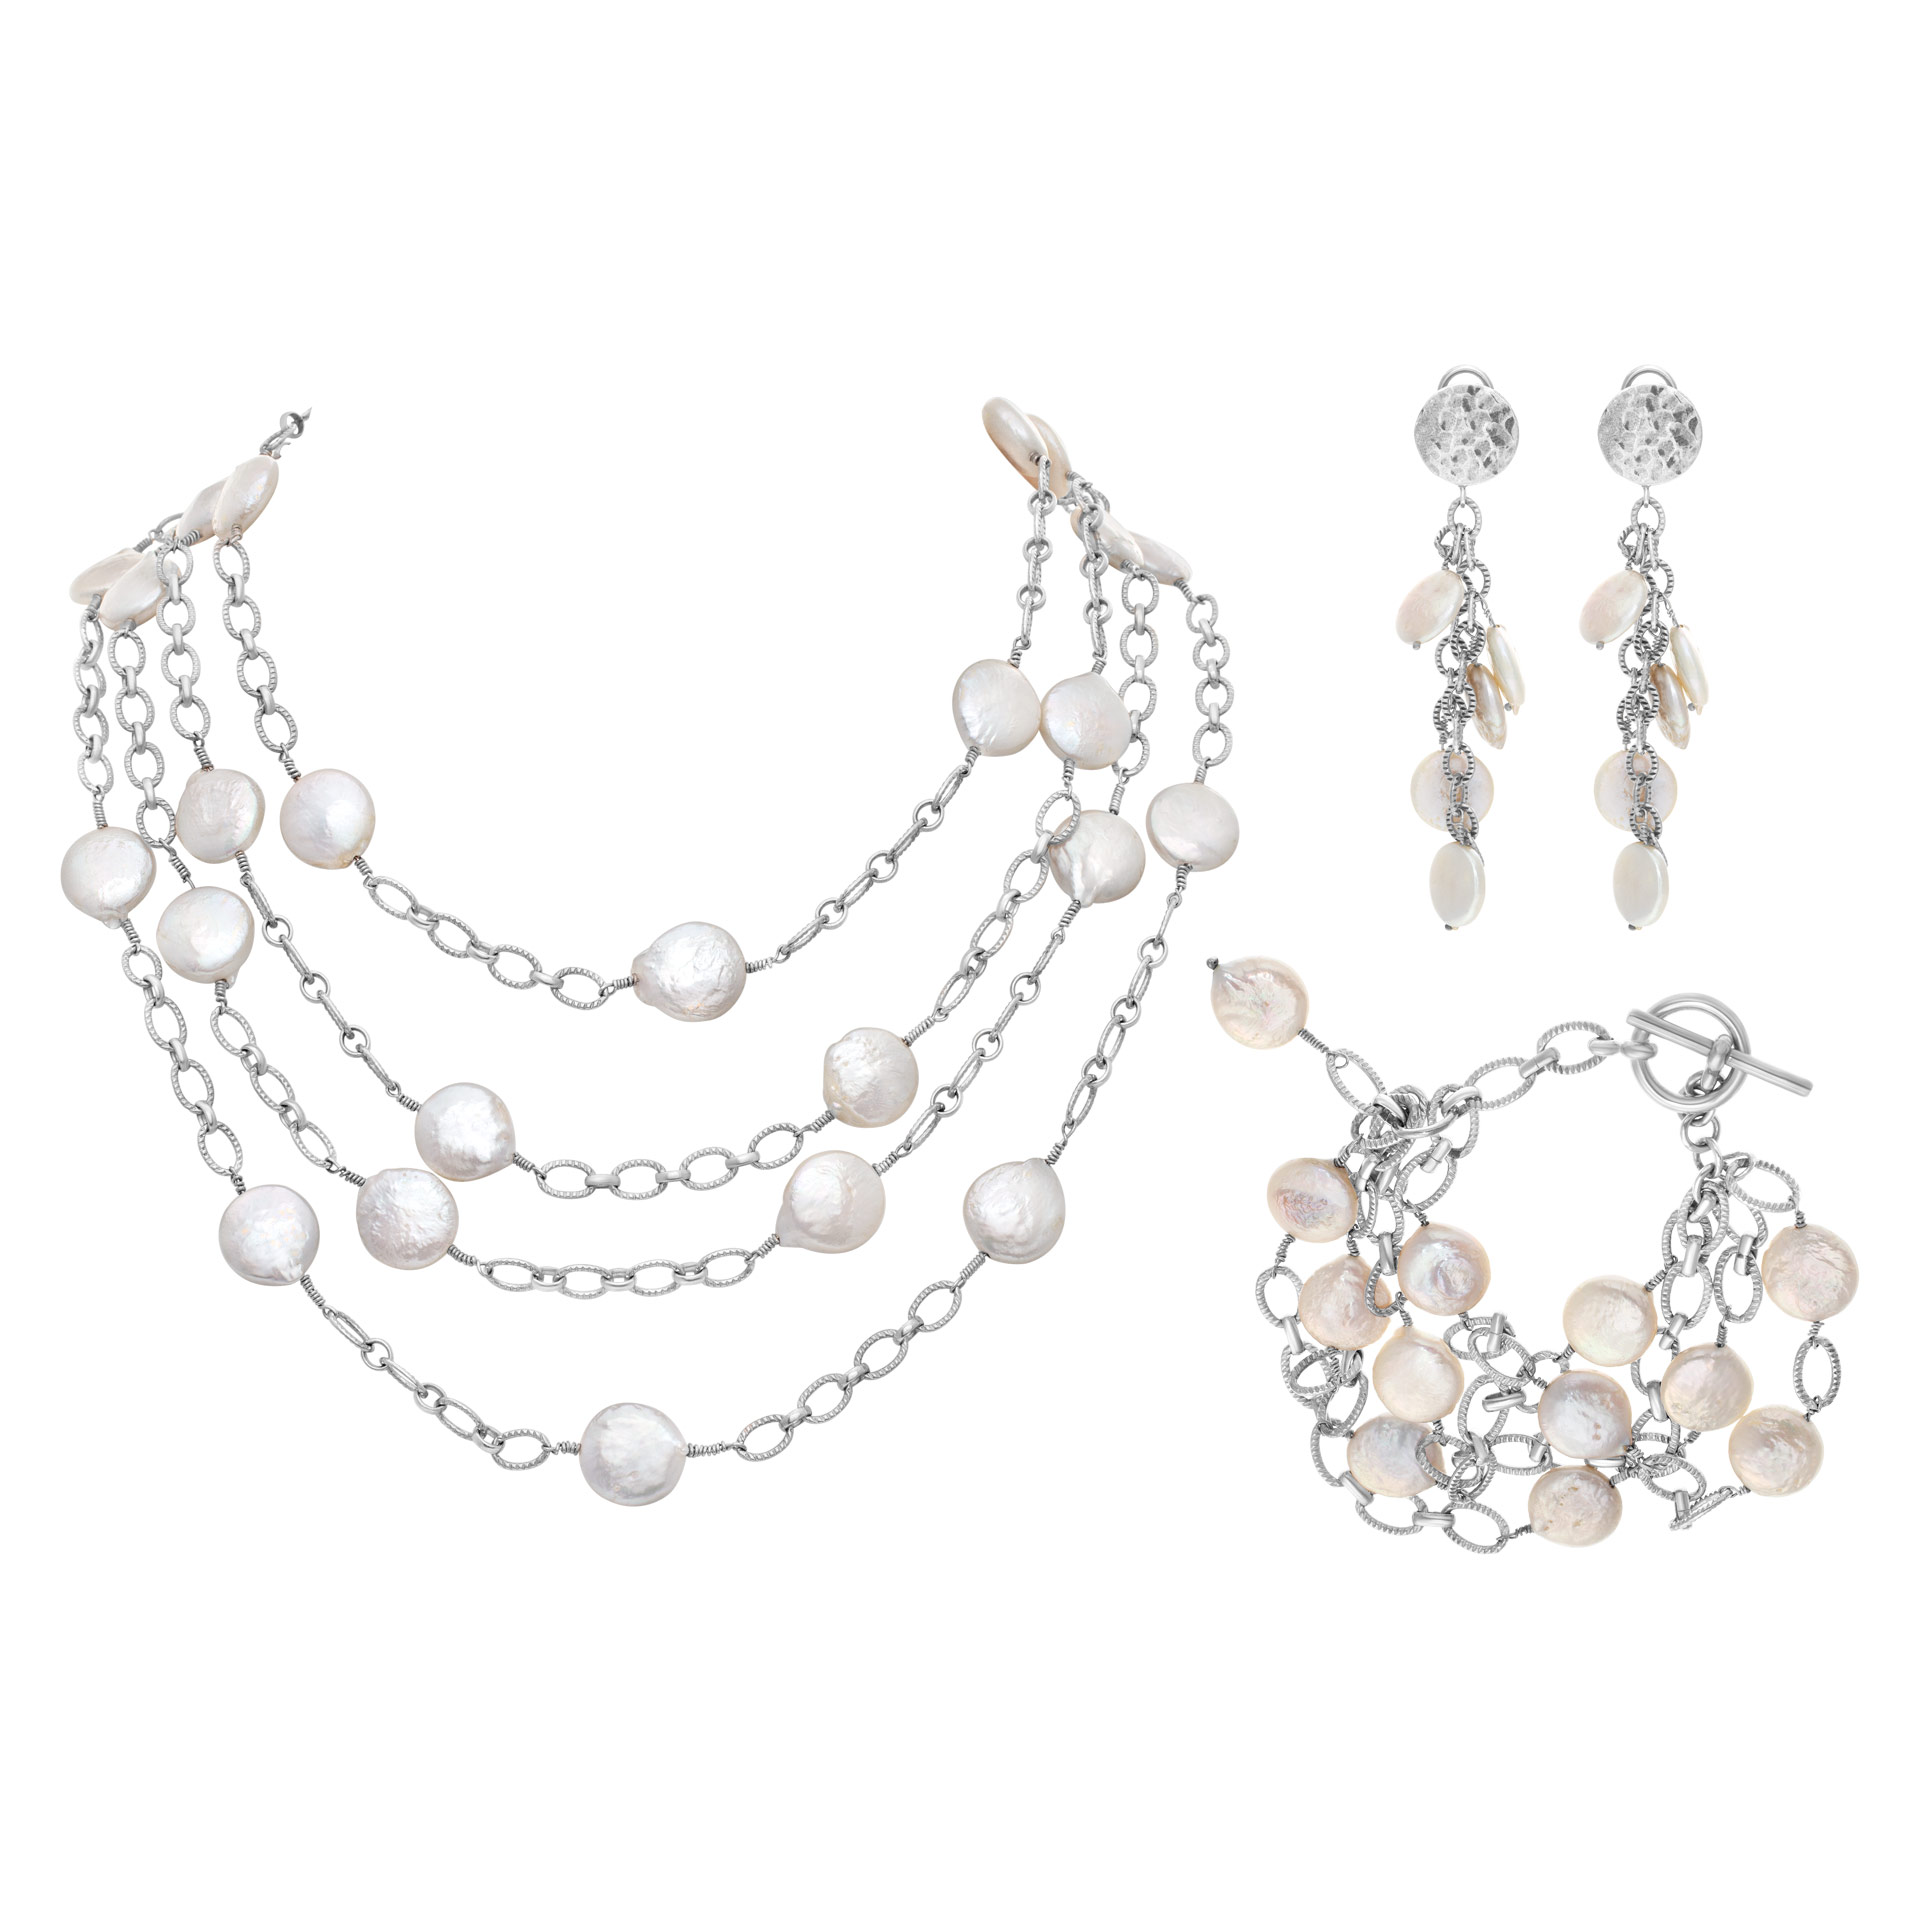 Set  with earrings, bracelet and necklace in 14k white gold with Mother of Pearl dots